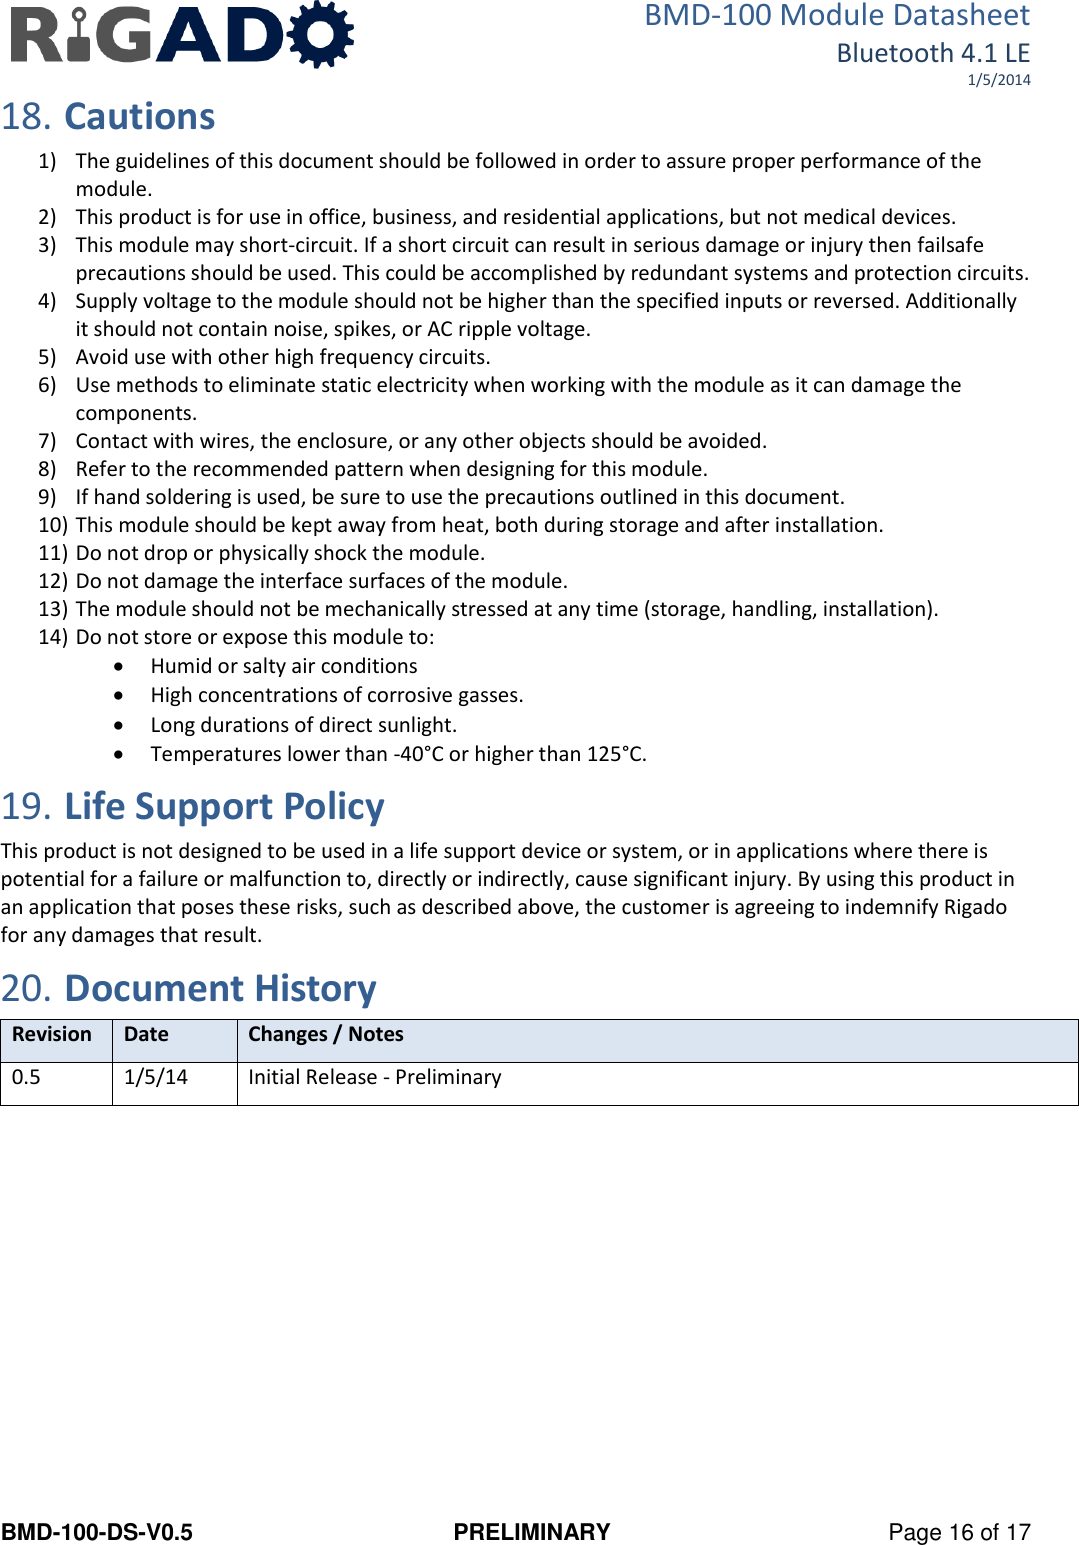 BMD-100 Module Datasheet Bluetooth 4.1 LE 1/5/2014 BMD-100-DS-V0.5  PRELIMINARY  Page 16 of 17 18. Cautions 1) The guidelines of this document should be followed in order to assure proper performance of the module. 2) This product is for use in office, business, and residential applications, but not medical devices. 3) This module may short-circuit. If a short circuit can result in serious damage or injury then failsafe precautions should be used. This could be accomplished by redundant systems and protection circuits. 4) Supply voltage to the module should not be higher than the specified inputs or reversed. Additionally it should not contain noise, spikes, or AC ripple voltage. 5) Avoid use with other high frequency circuits. 6) Use methods to eliminate static electricity when working with the module as it can damage the components. 7) Contact with wires, the enclosure, or any other objects should be avoided. 8) Refer to the recommended pattern when designing for this module. 9) If hand soldering is used, be sure to use the precautions outlined in this document. 10) This module should be kept away from heat, both during storage and after installation. 11) Do not drop or physically shock the module. 12) Do not damage the interface surfaces of the module. 13) The module should not be mechanically stressed at any time (storage, handling, installation). 14) Do not store or expose this module to:  Humid or salty air conditions  High concentrations of corrosive gasses.  Long durations of direct sunlight.  Temperatures lower than -40°C or higher than 125°C. 19. Life Support Policy This product is not designed to be used in a life support device or system, or in applications where there is potential for a failure or malfunction to, directly or indirectly, cause significant injury. By using this product in an application that poses these risks, such as described above, the customer is agreeing to indemnify Rigado for any damages that result. 20. Document History Revision Date Changes / Notes 0.5 1/5/14 Initial Release - Preliminary   